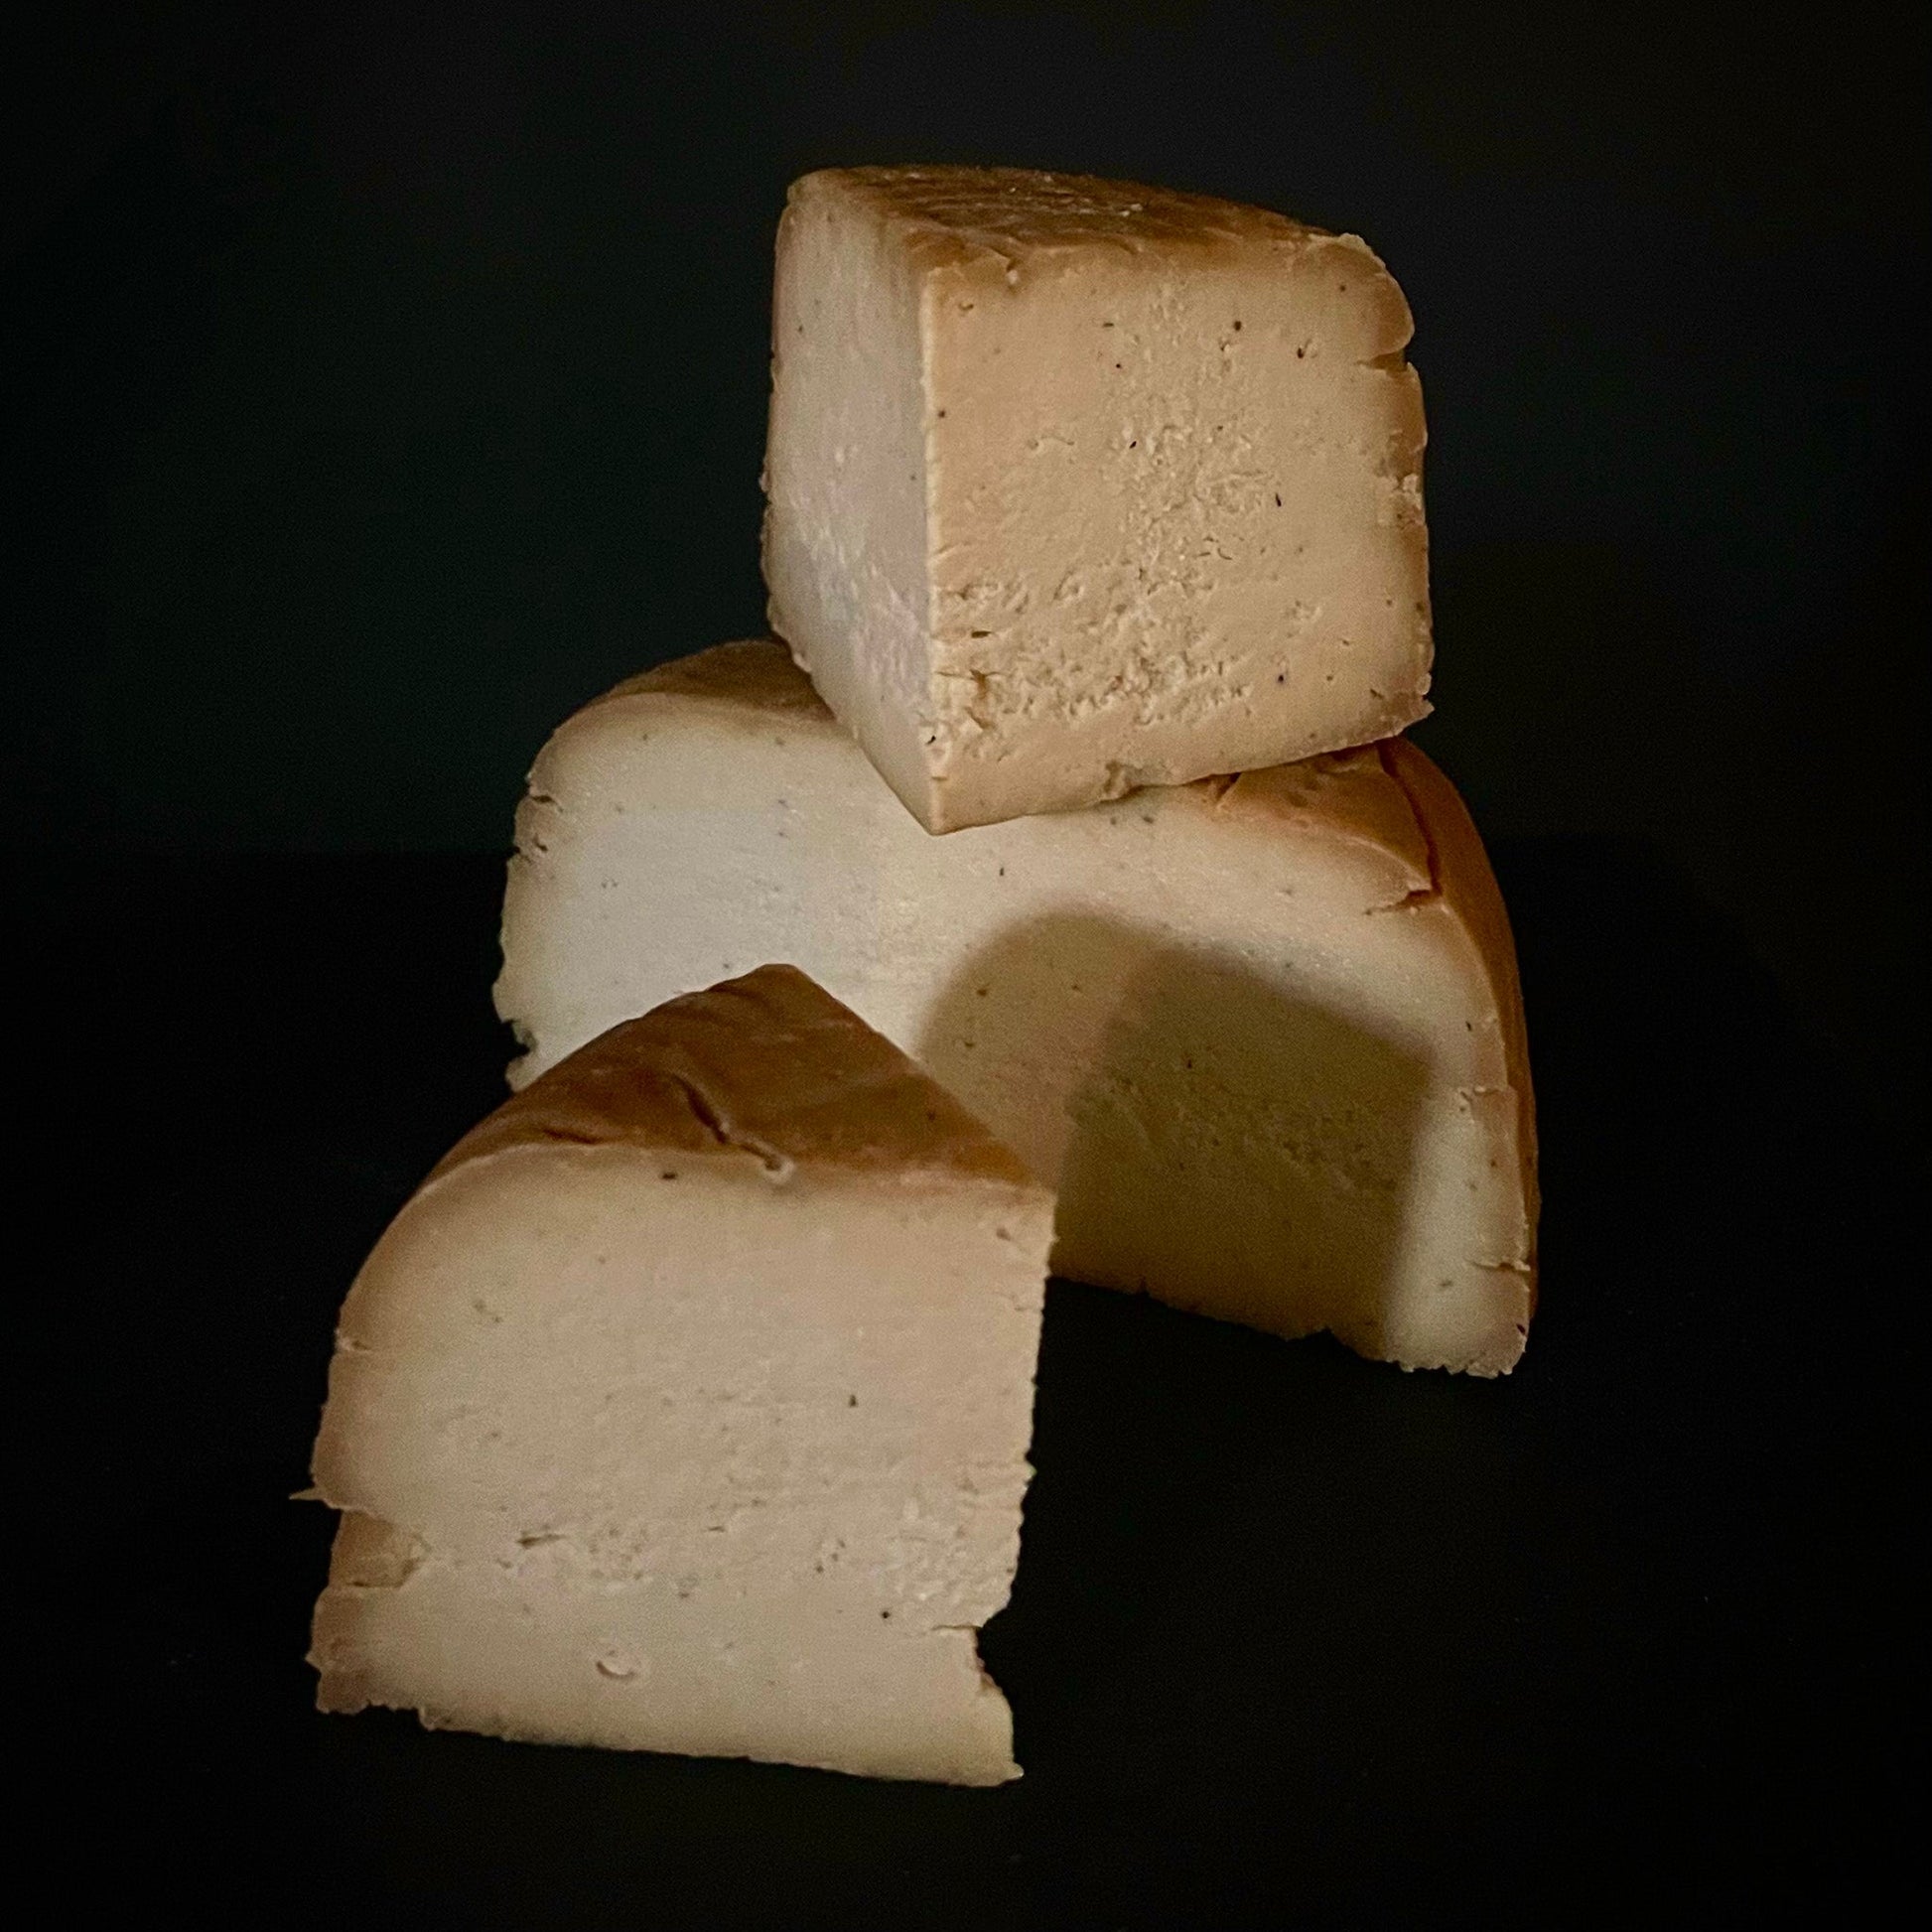 Goblin is our plant-based Gouda style cheese. Vegan Charcuterie available in Philadelphia. Delivery or UPS Shipping available